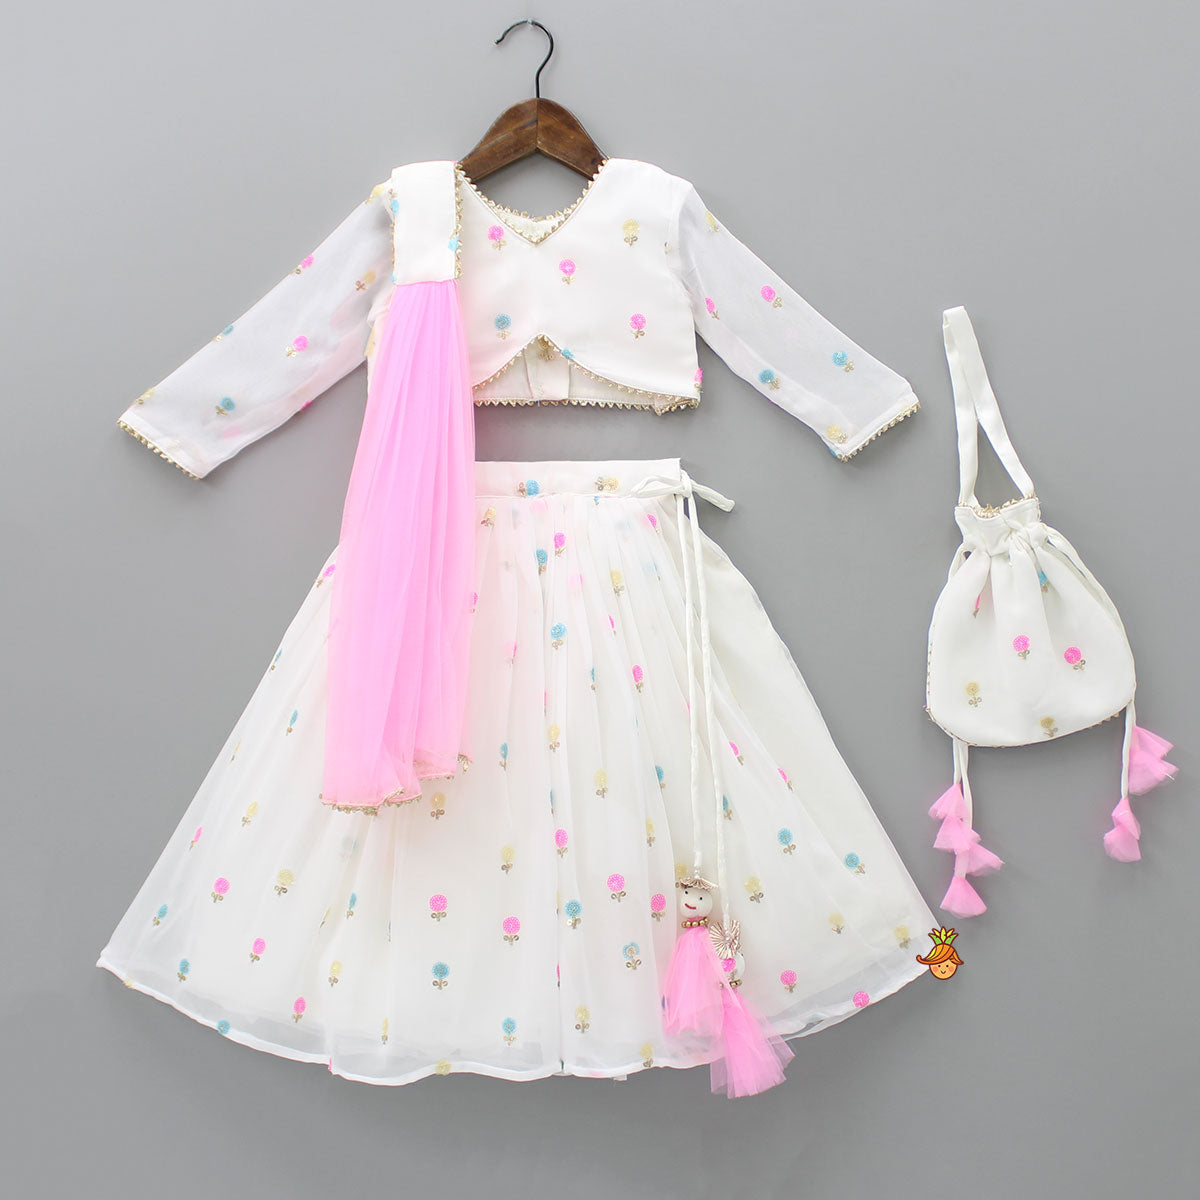 Embroidered Off-White Top And Lehenga With Contrasting Pink Net Dupatta And Potli Bag